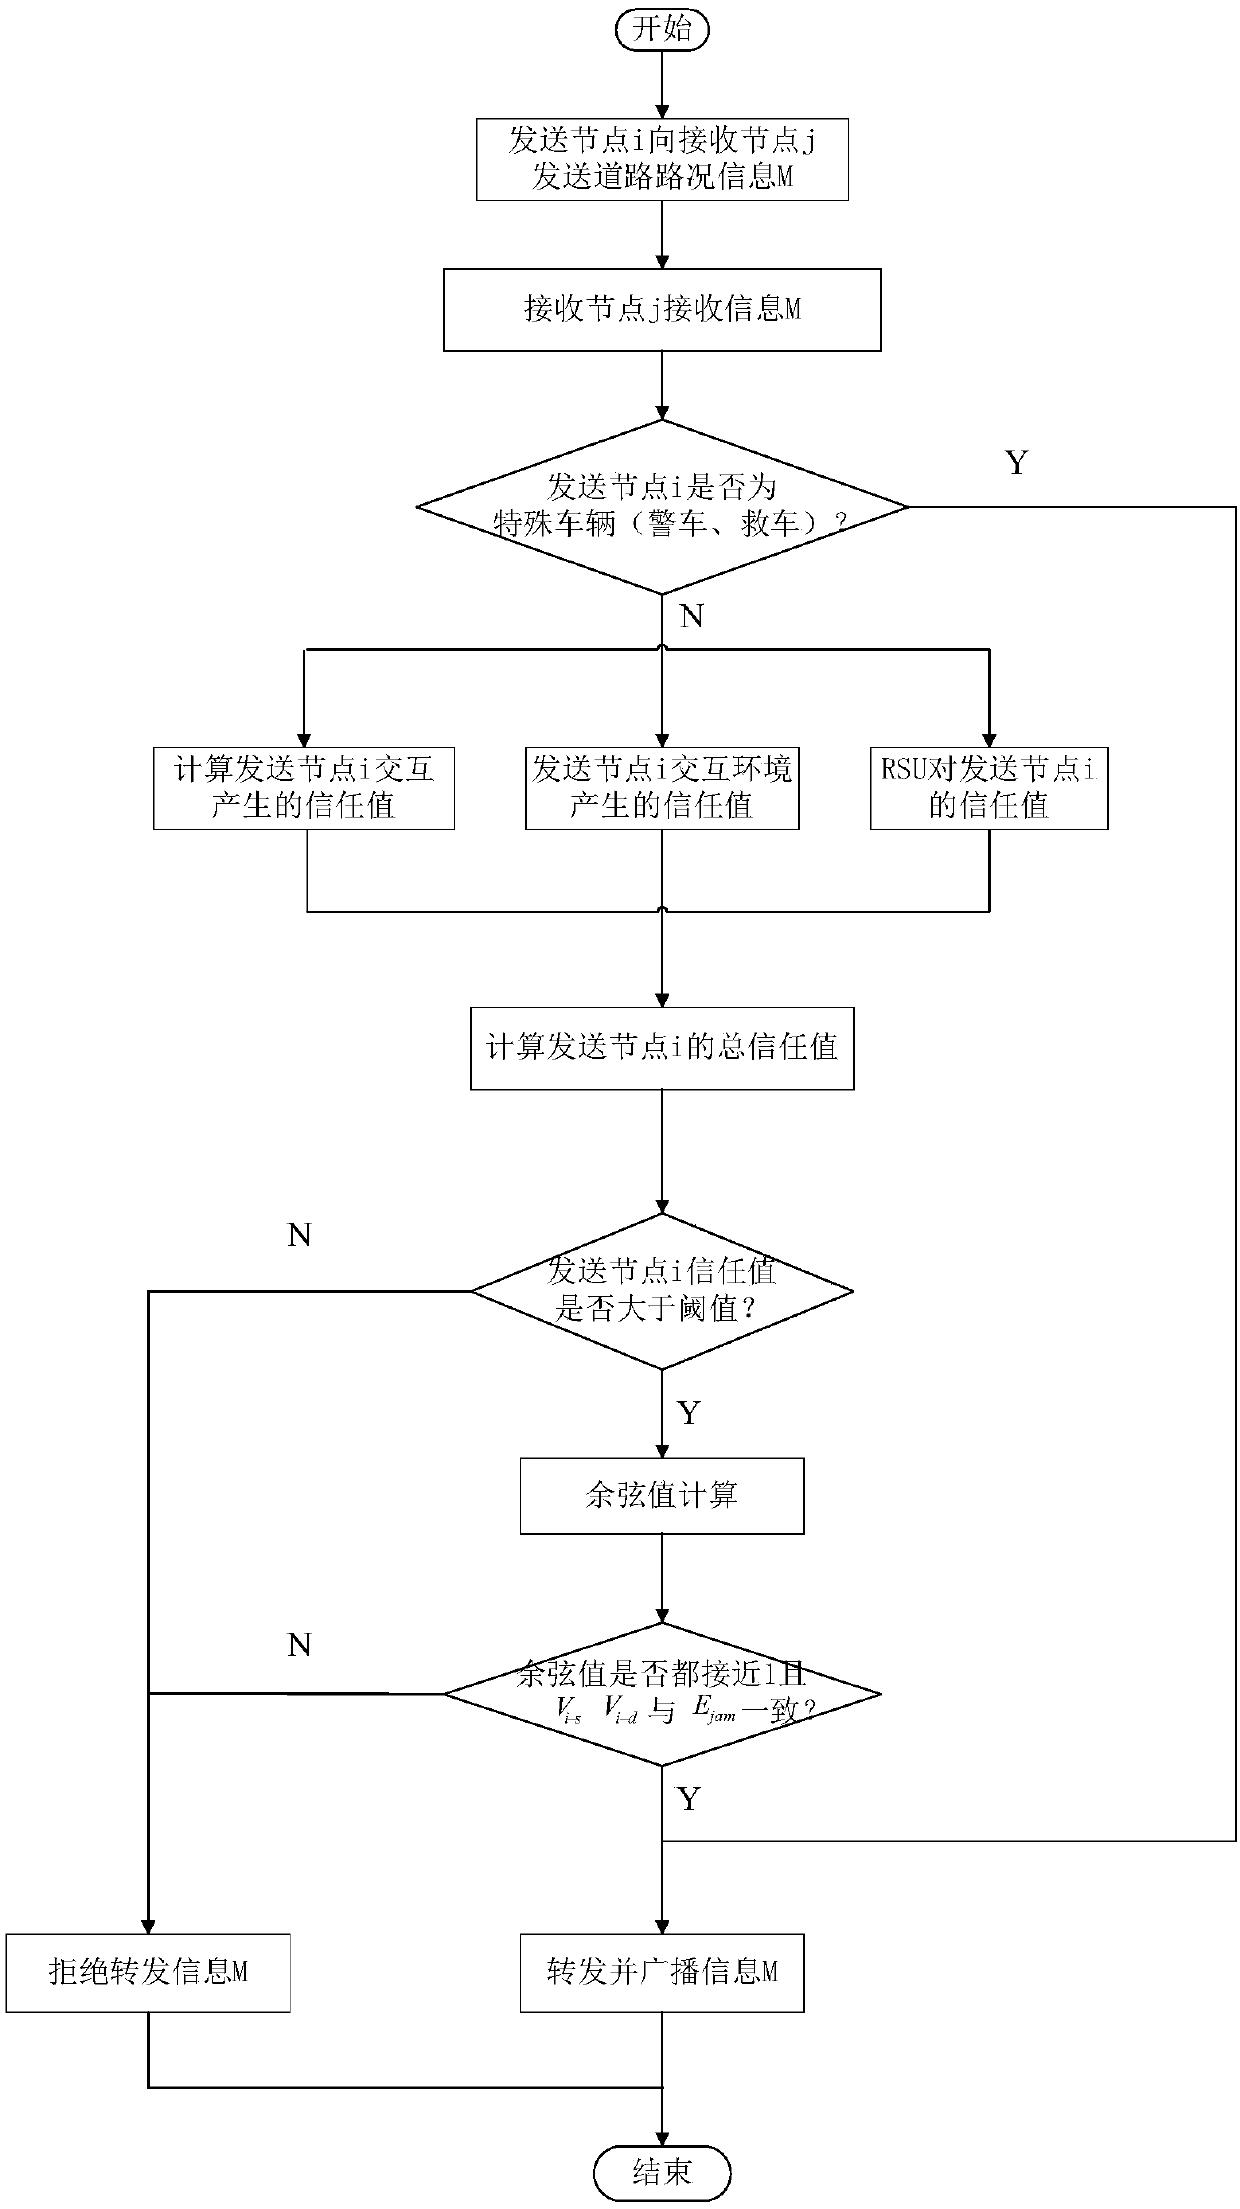 Traffic information identification and forwarding method based on dual trust mechanism in the Internet of Vehicles environment